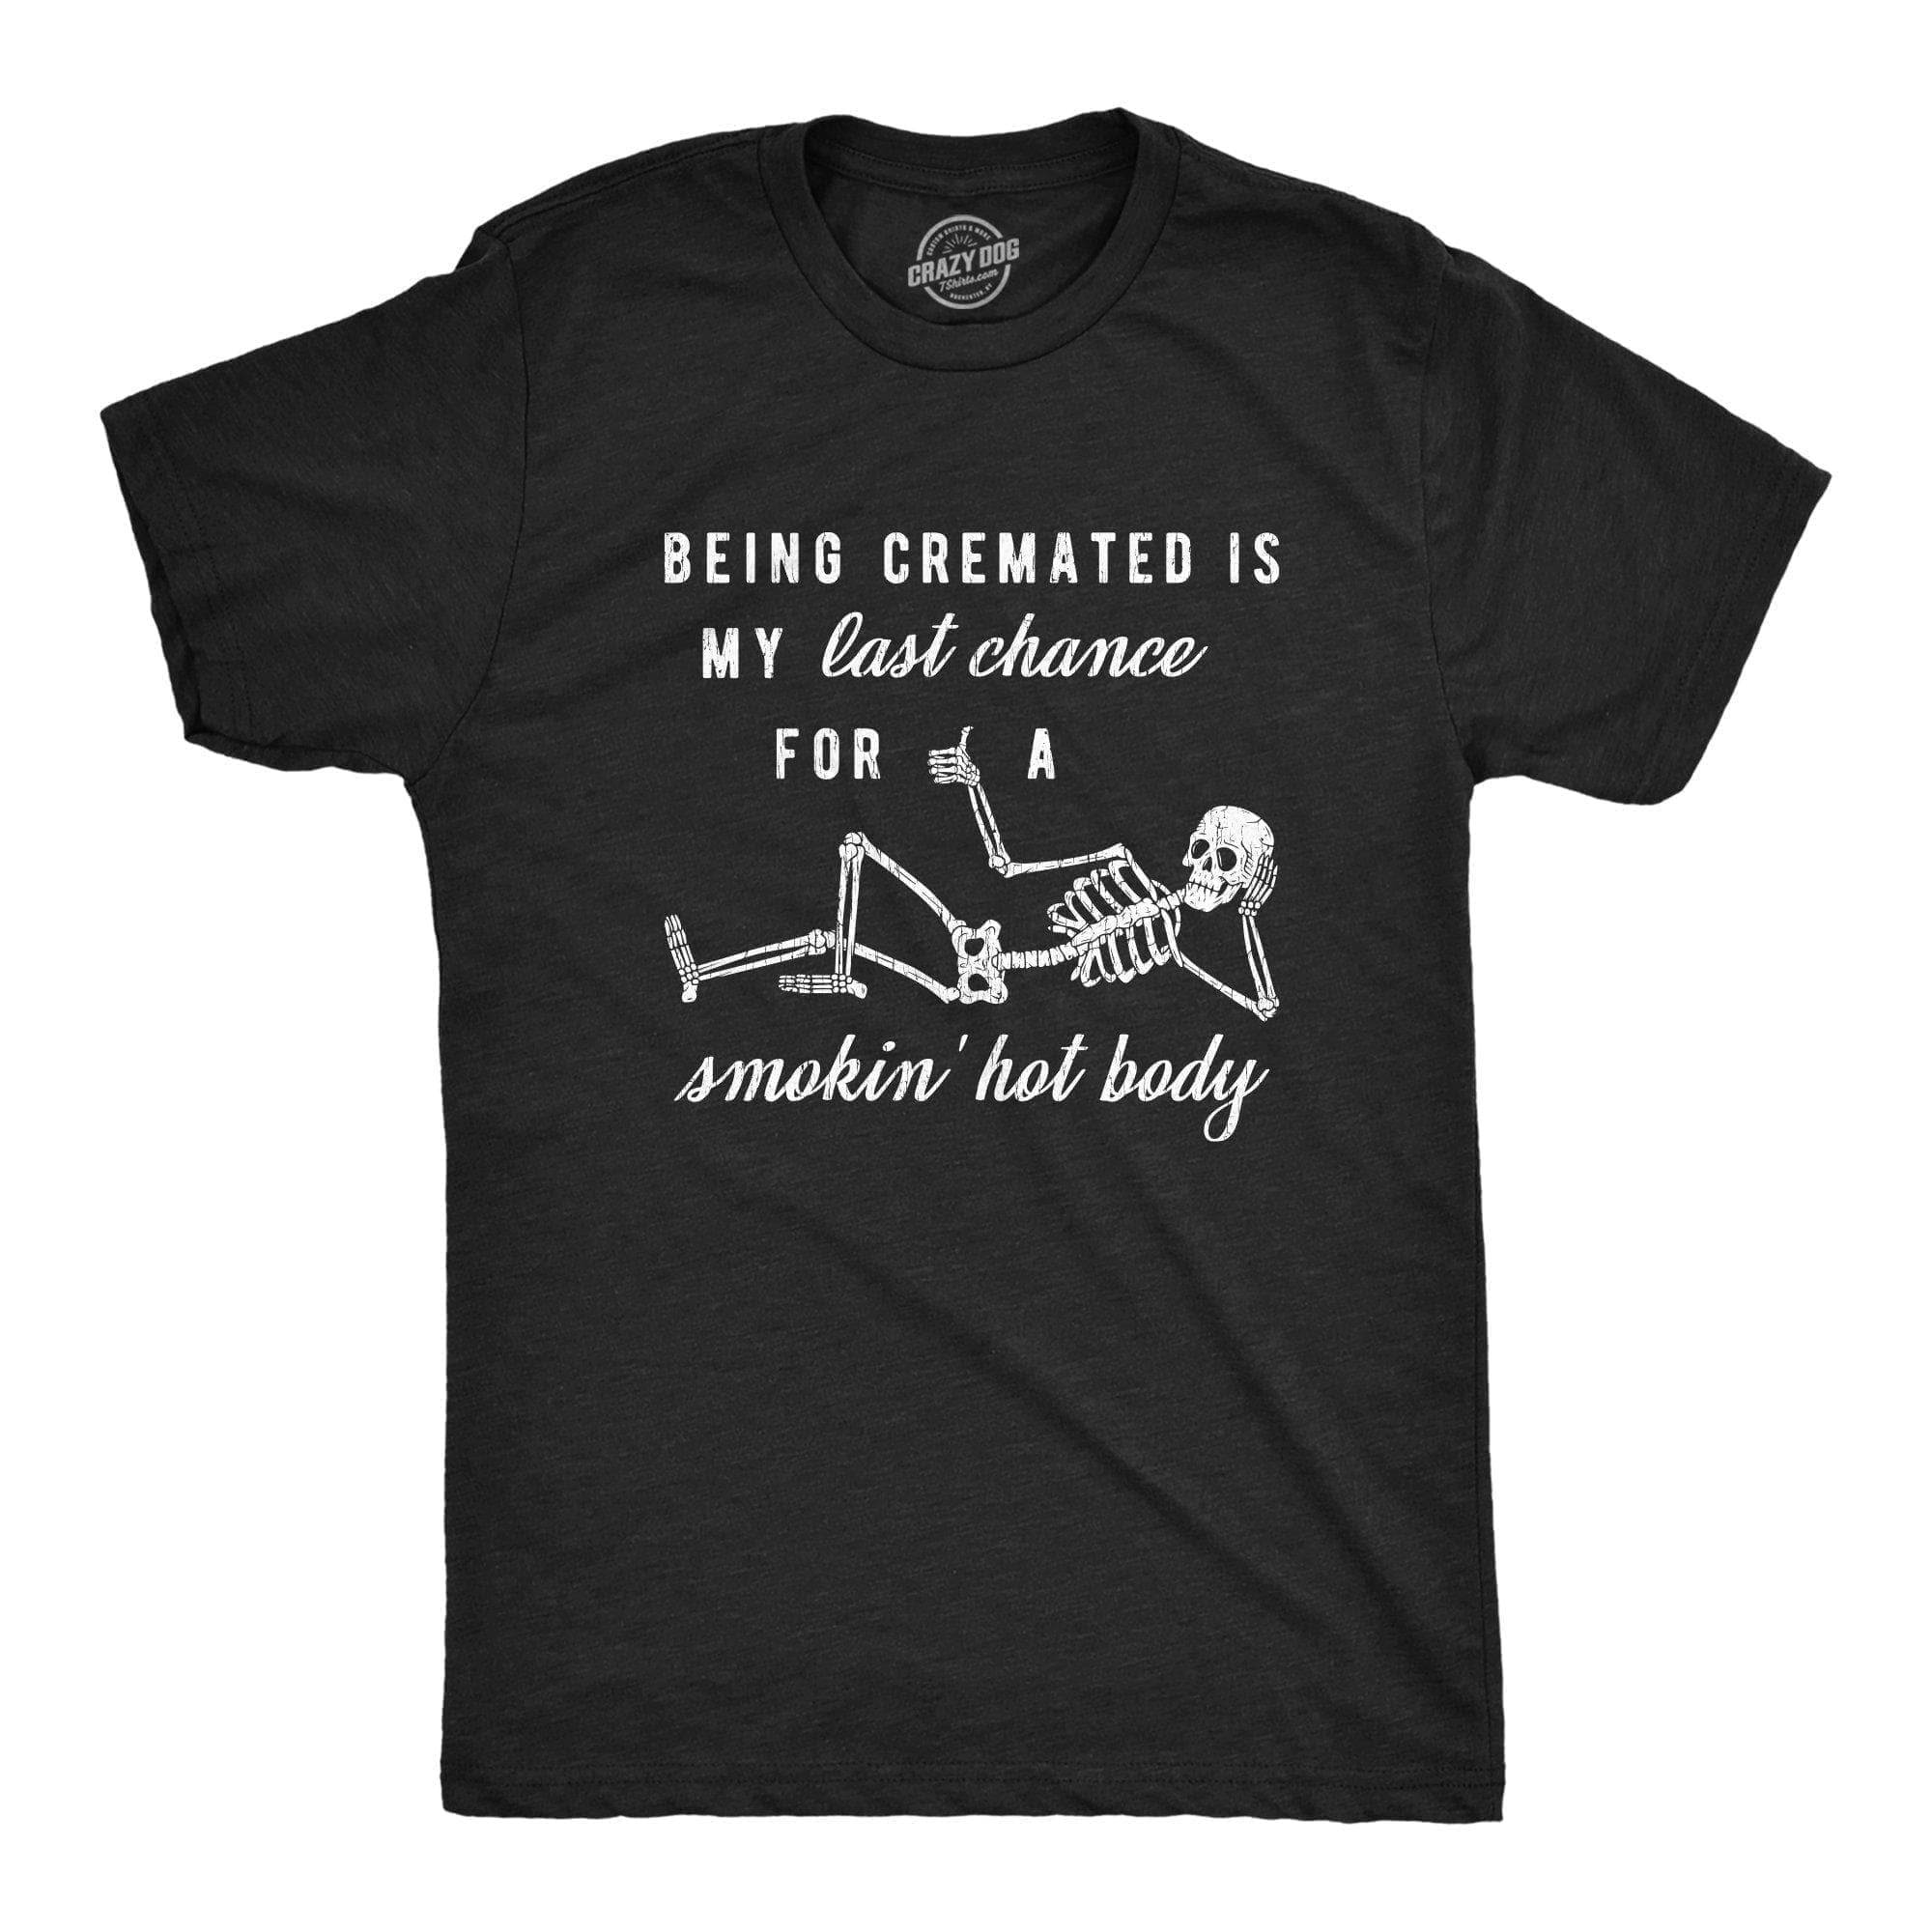 Being Cremated Is My Last Chance For A Smokin' Hot Body Men's Tshirt - Crazy Dog T-Shirts